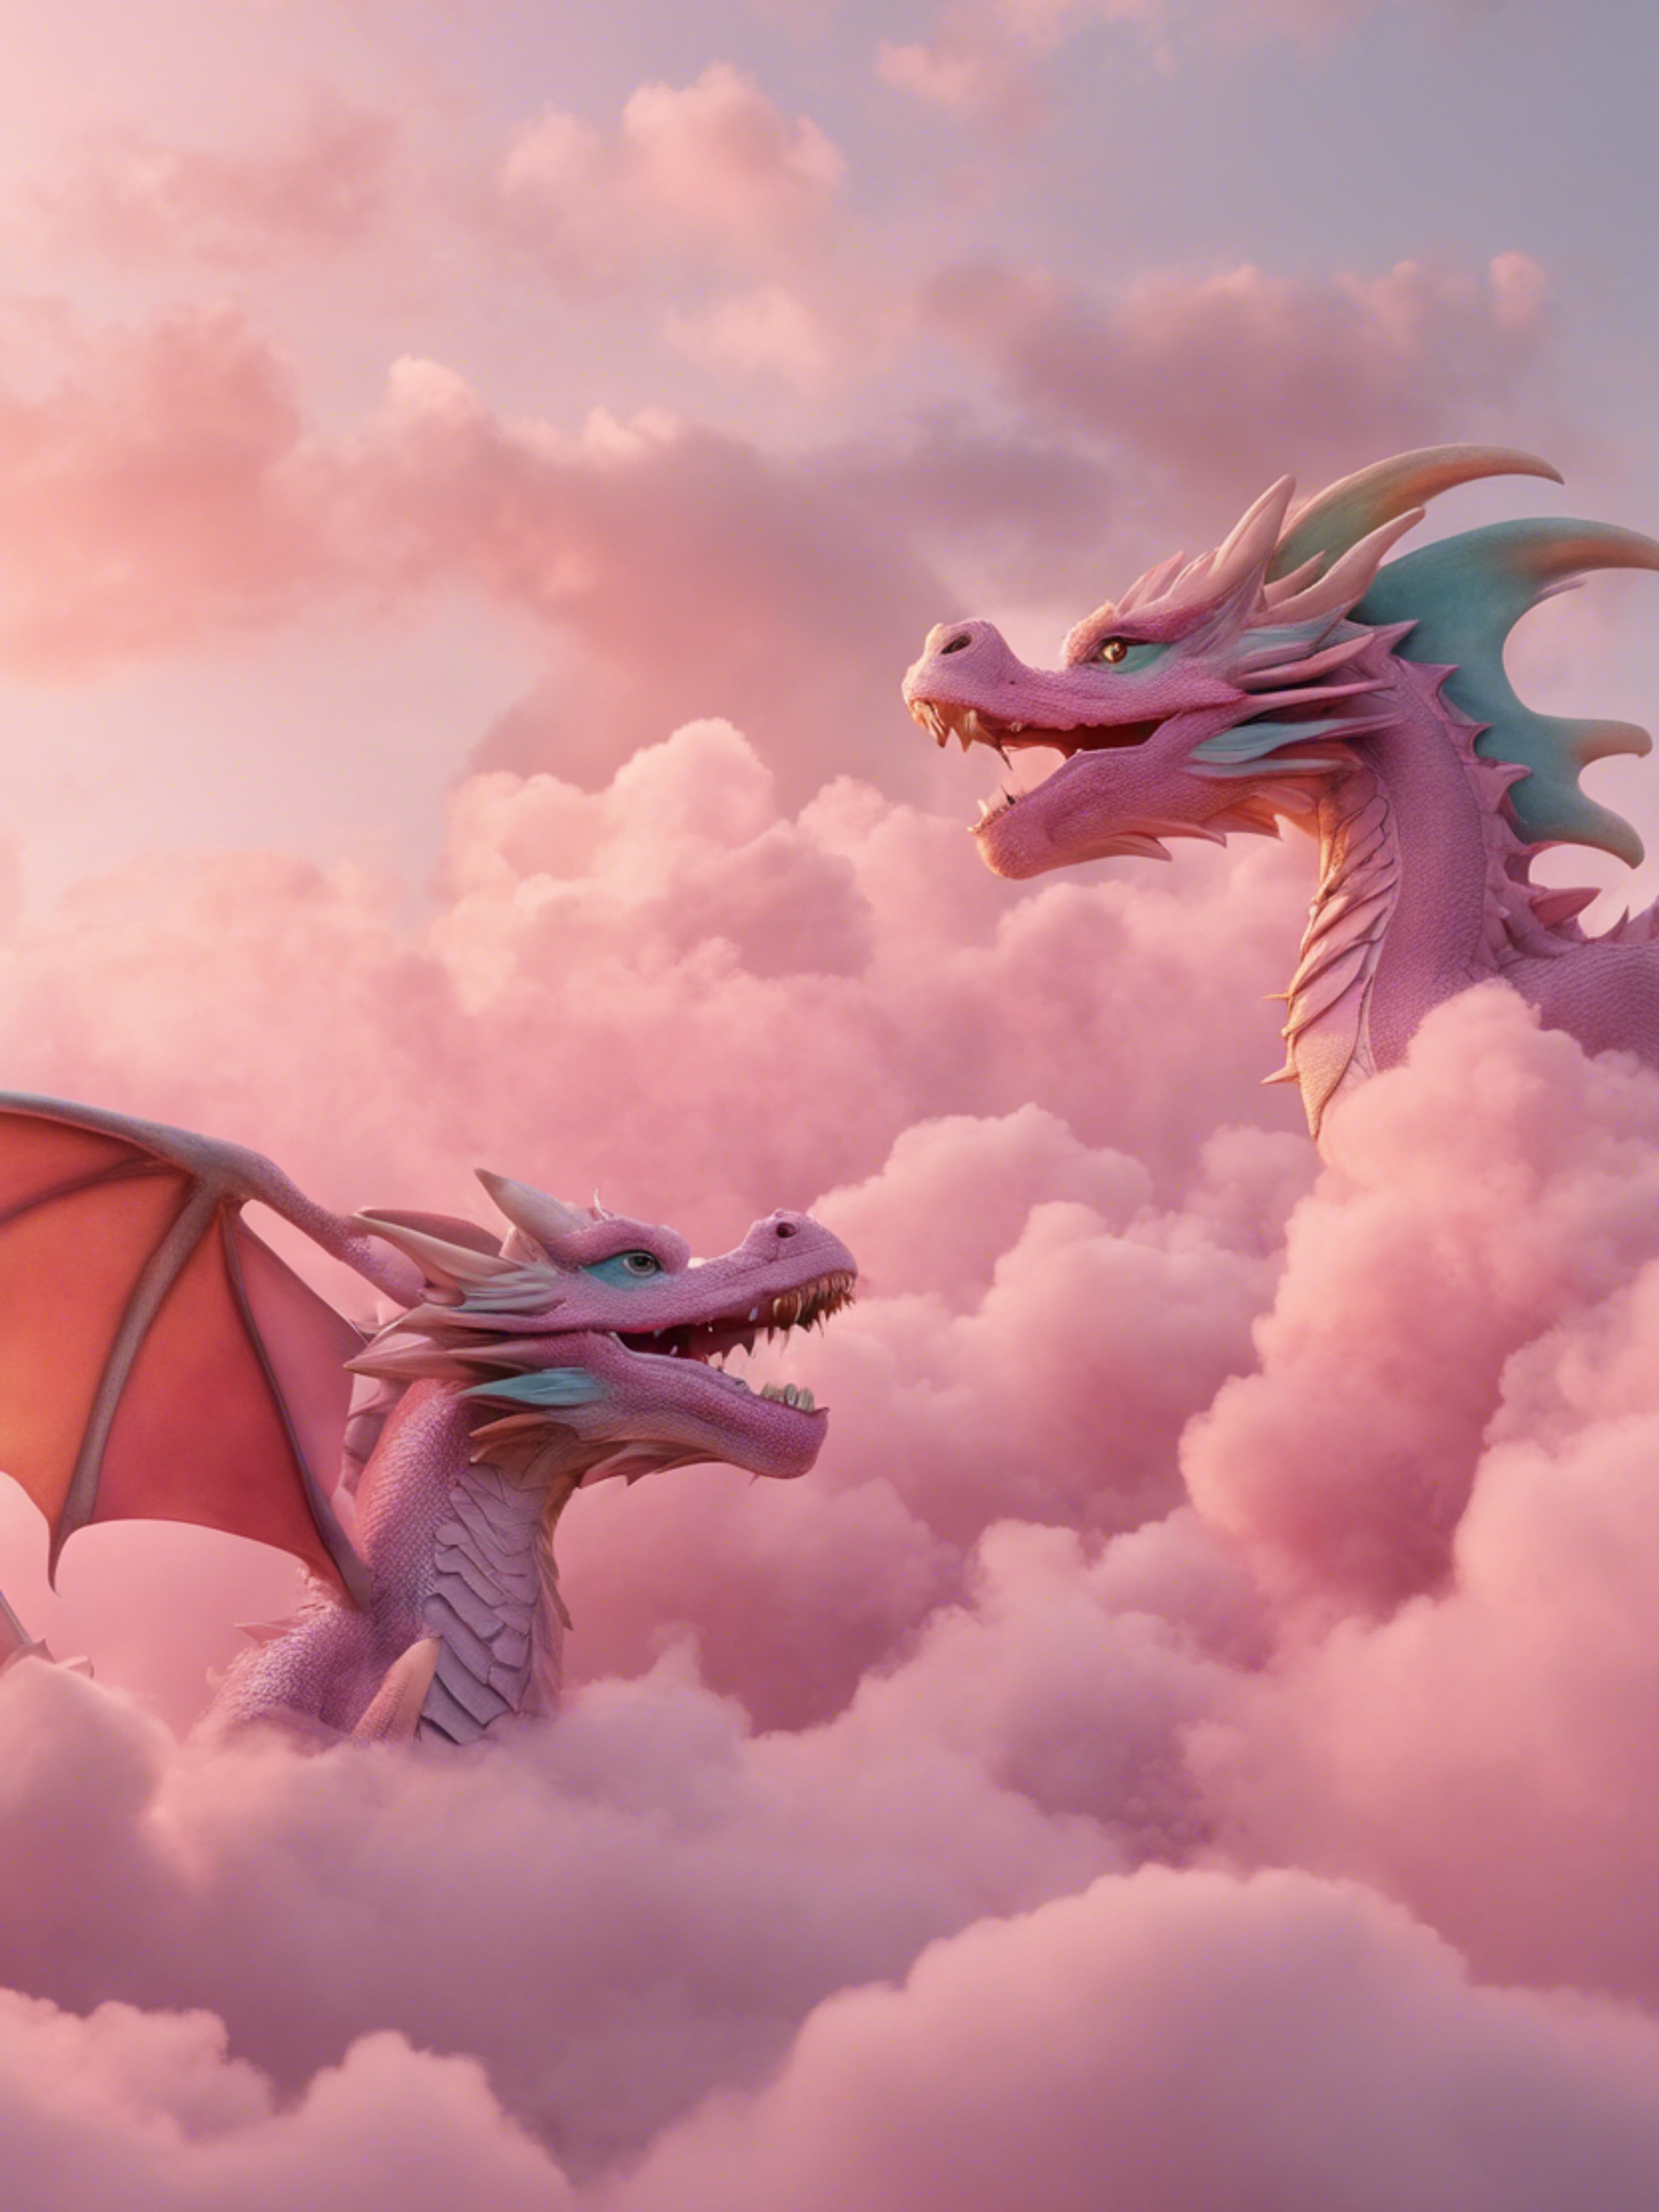 Trio of playful pastel-colored dragons flitting among fluffy pink clouds during sunrise. Валлпапер[e1ca69721ca941939a18]